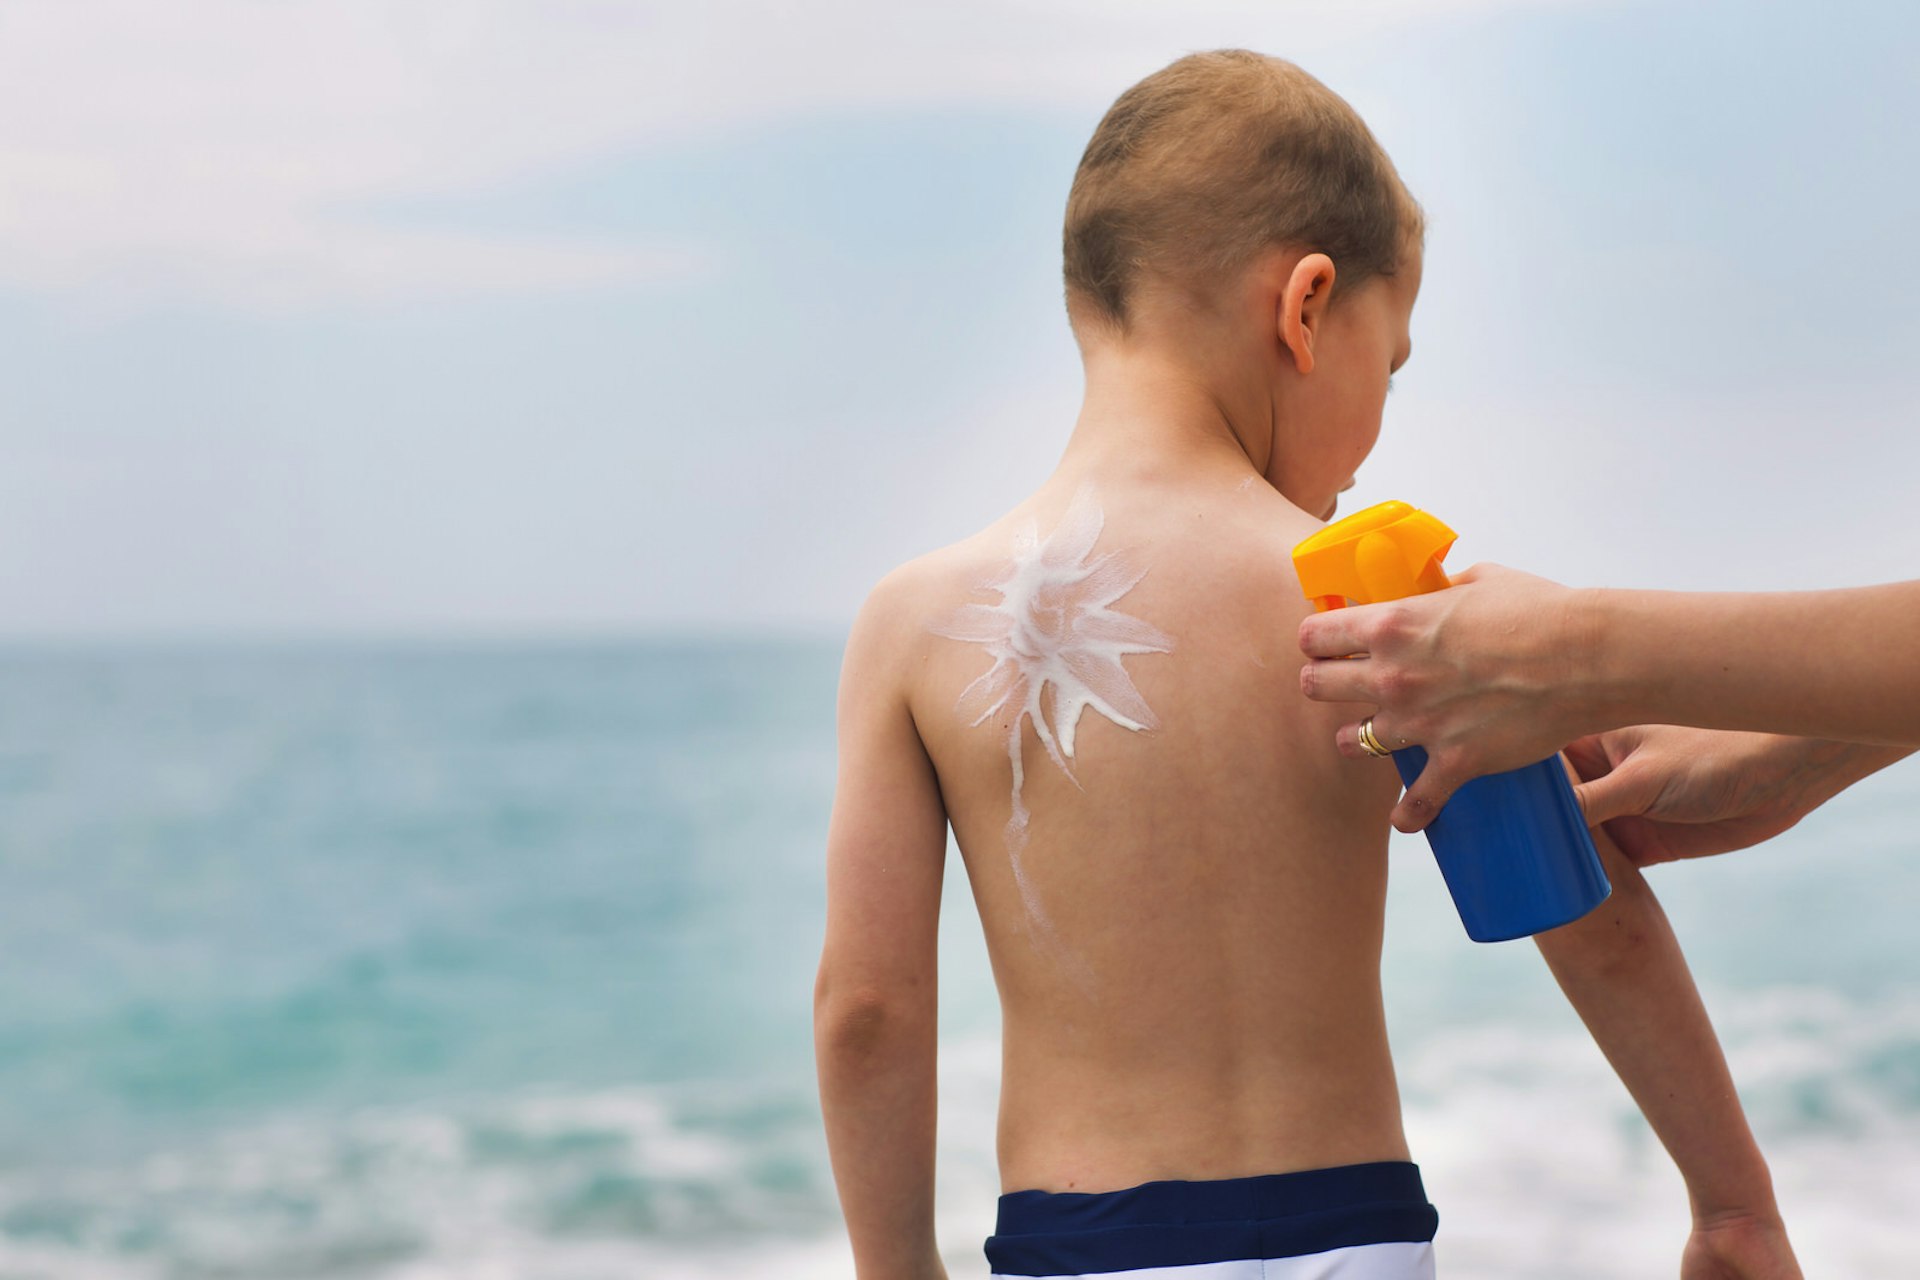 Boy on a beach having sunscreen applied to his back © adriaticfoto / Shutterstock